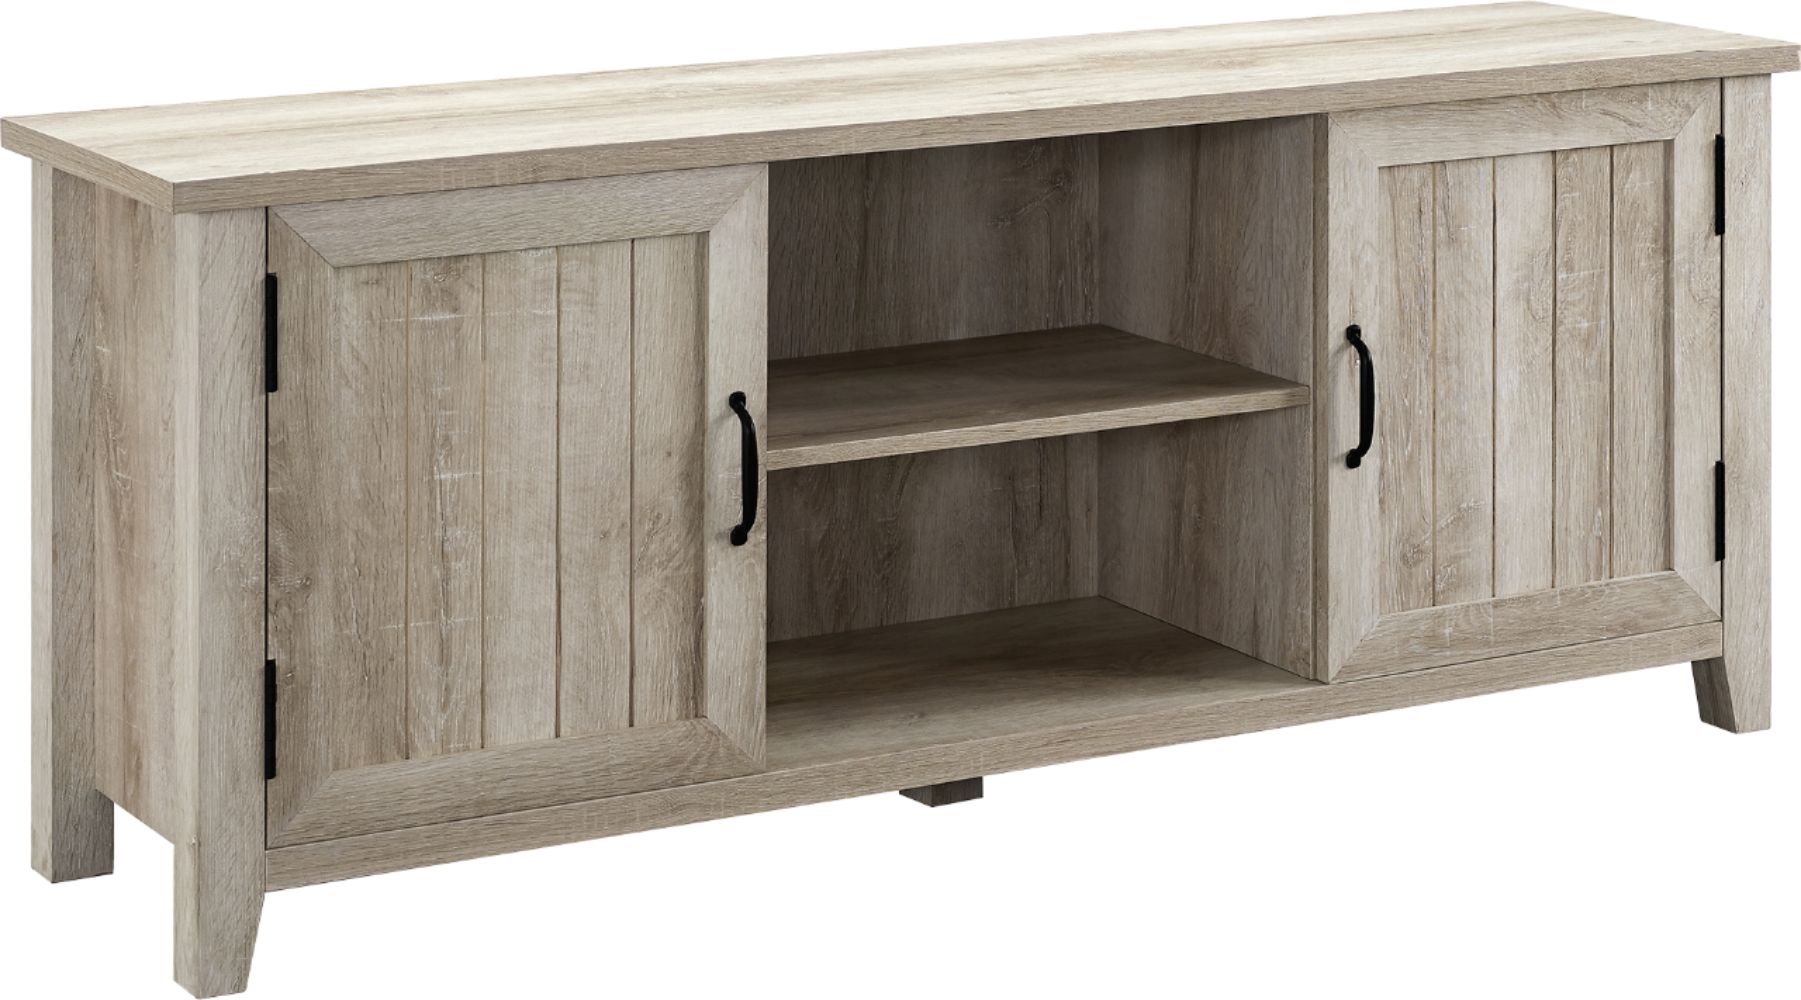 Angle View: Walker Edison - Modern Farmhouse TV Stand for Most TVs Up to 64" - White Oak